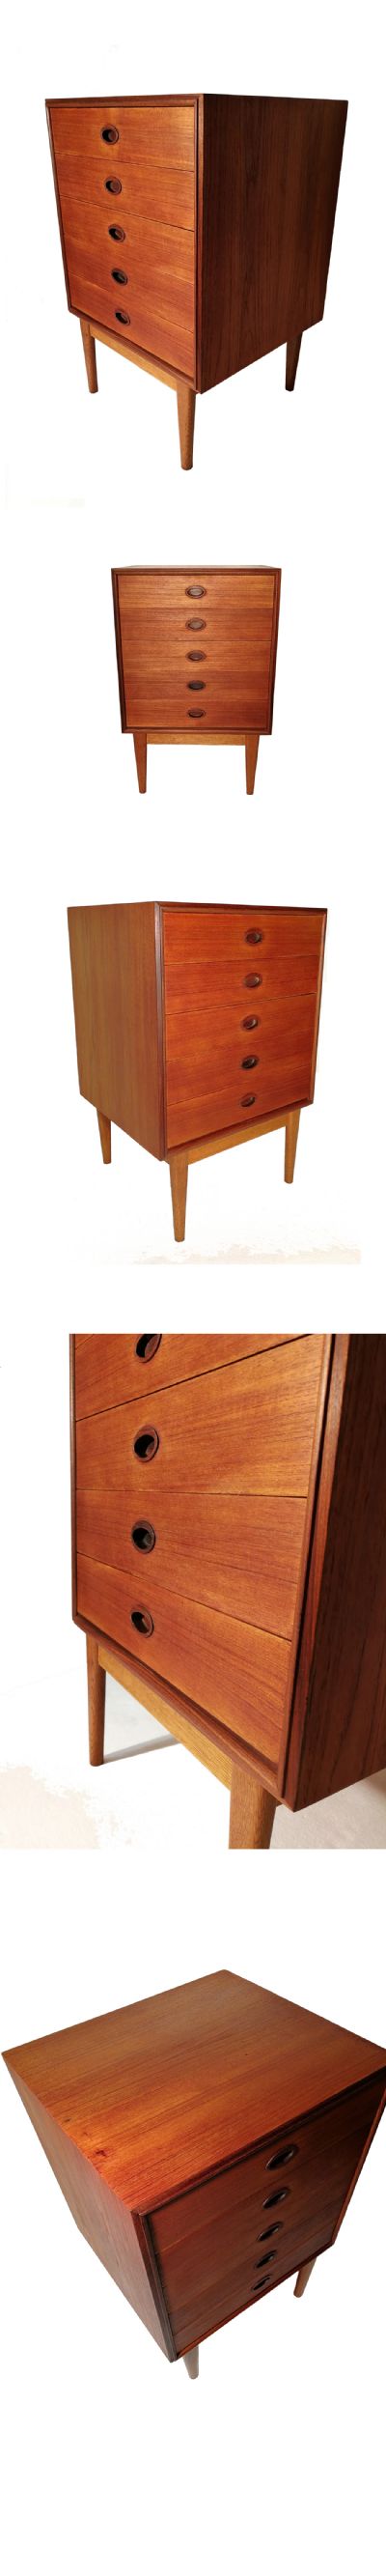 A small Danish chest of drawers c1960s. Constructed from teak and standing on an oak foot section.